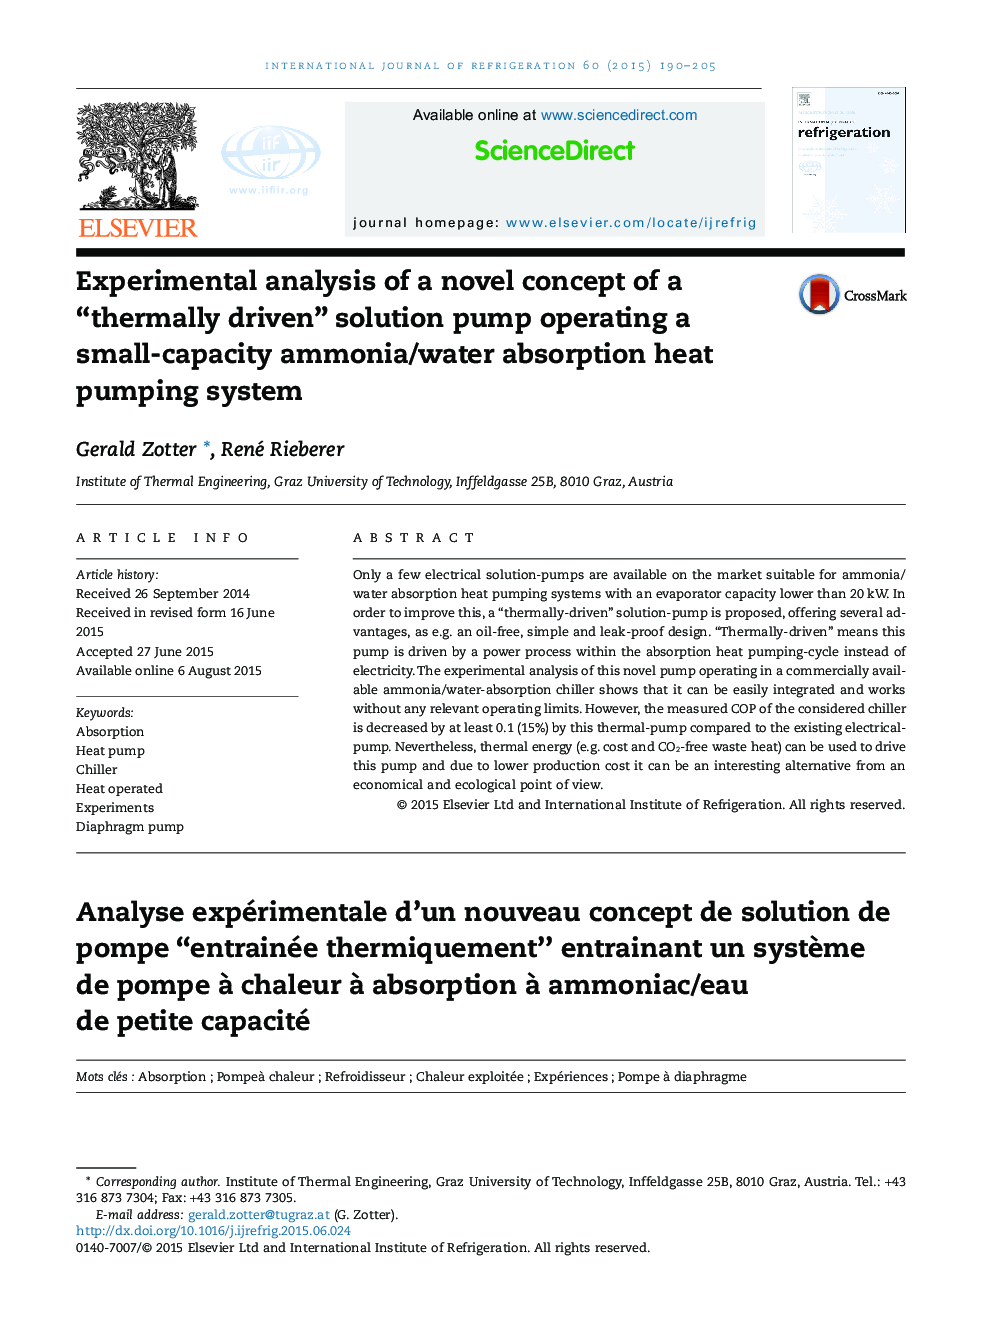 Experimental analysis of a novel concept of a “thermally driven” solution pump operating a small-capacity ammonia/water absorption heat pumping system